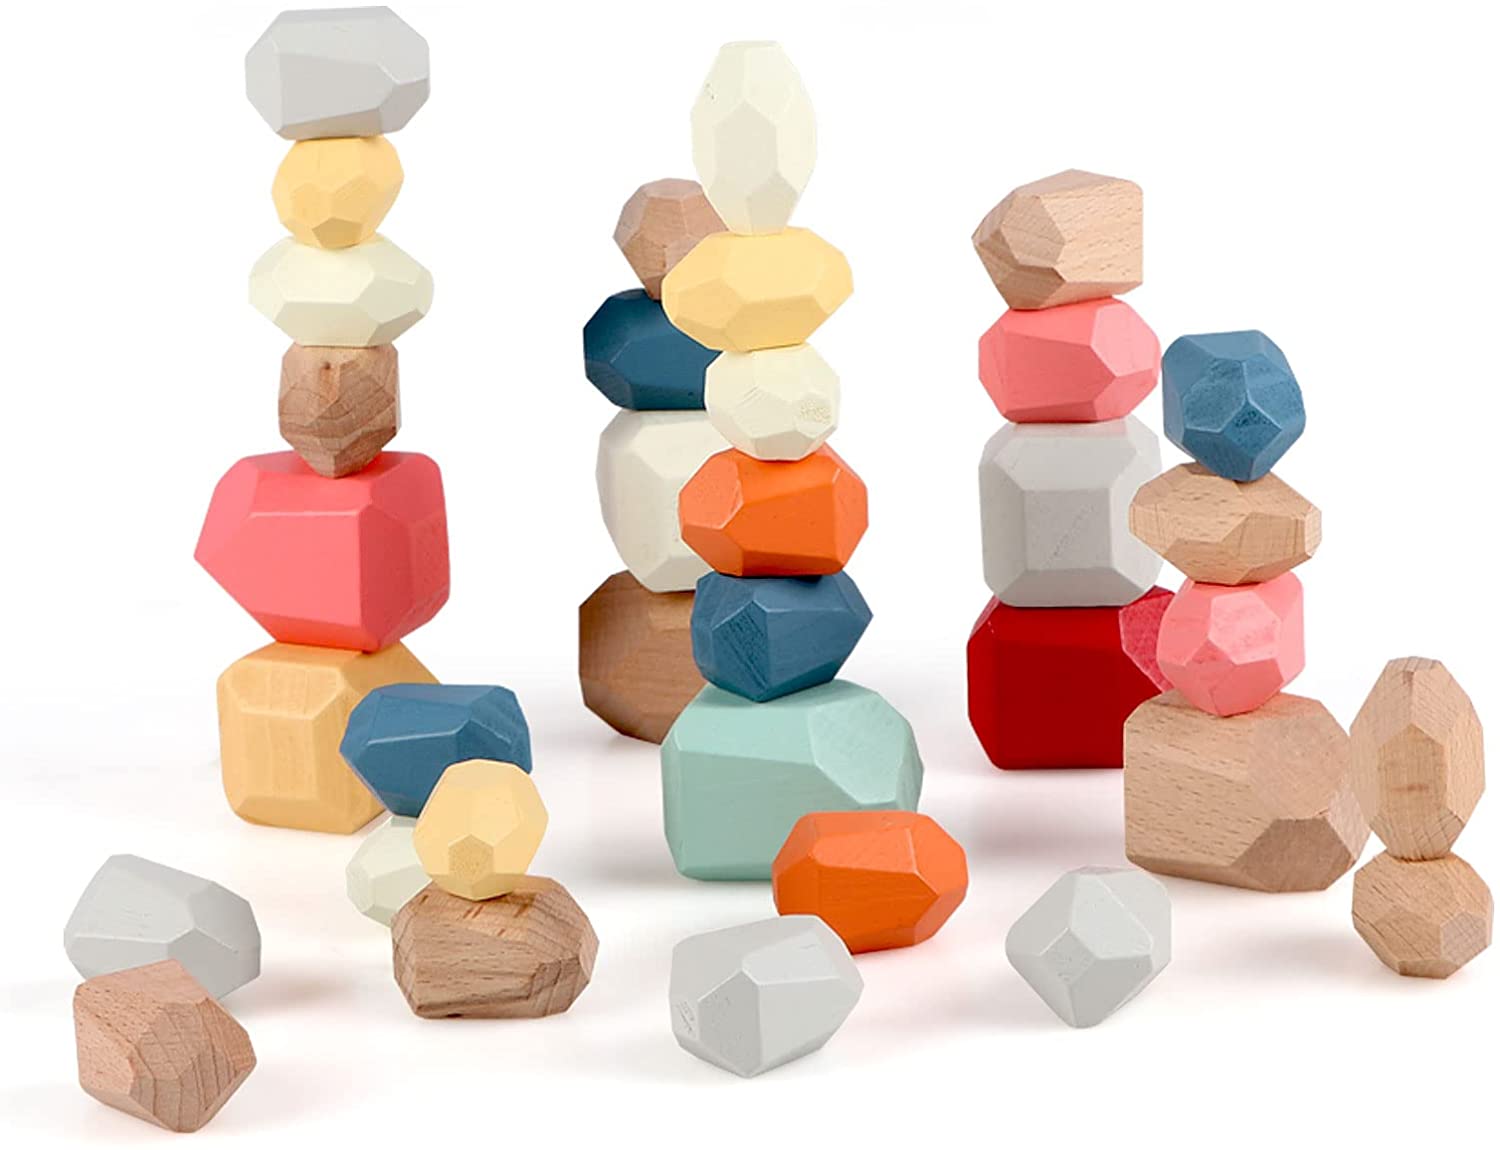 Colorful Stones Lightweight Building Blocks Set Preschool Toy Educational Games for Boys and Girls Wooden Rock Stacking Blocks Balancing Stones for Kids Colorful/12PCS 